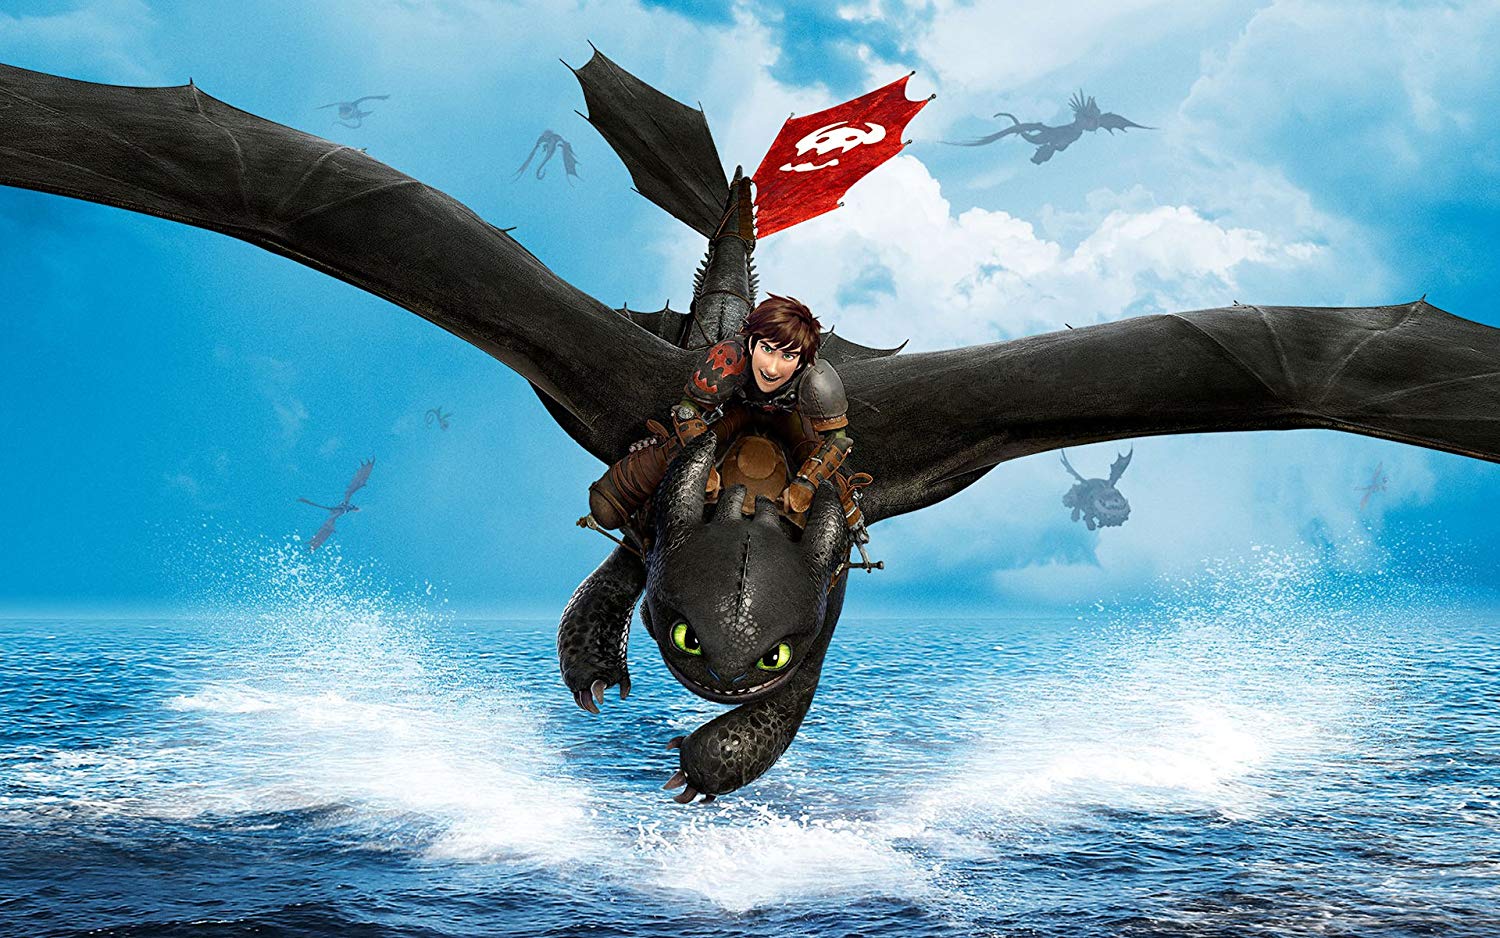 Posterhouzz Movie How To Train Your Dragon 2 Hiccup - Train Your Dragon 2010 - HD Wallpaper 